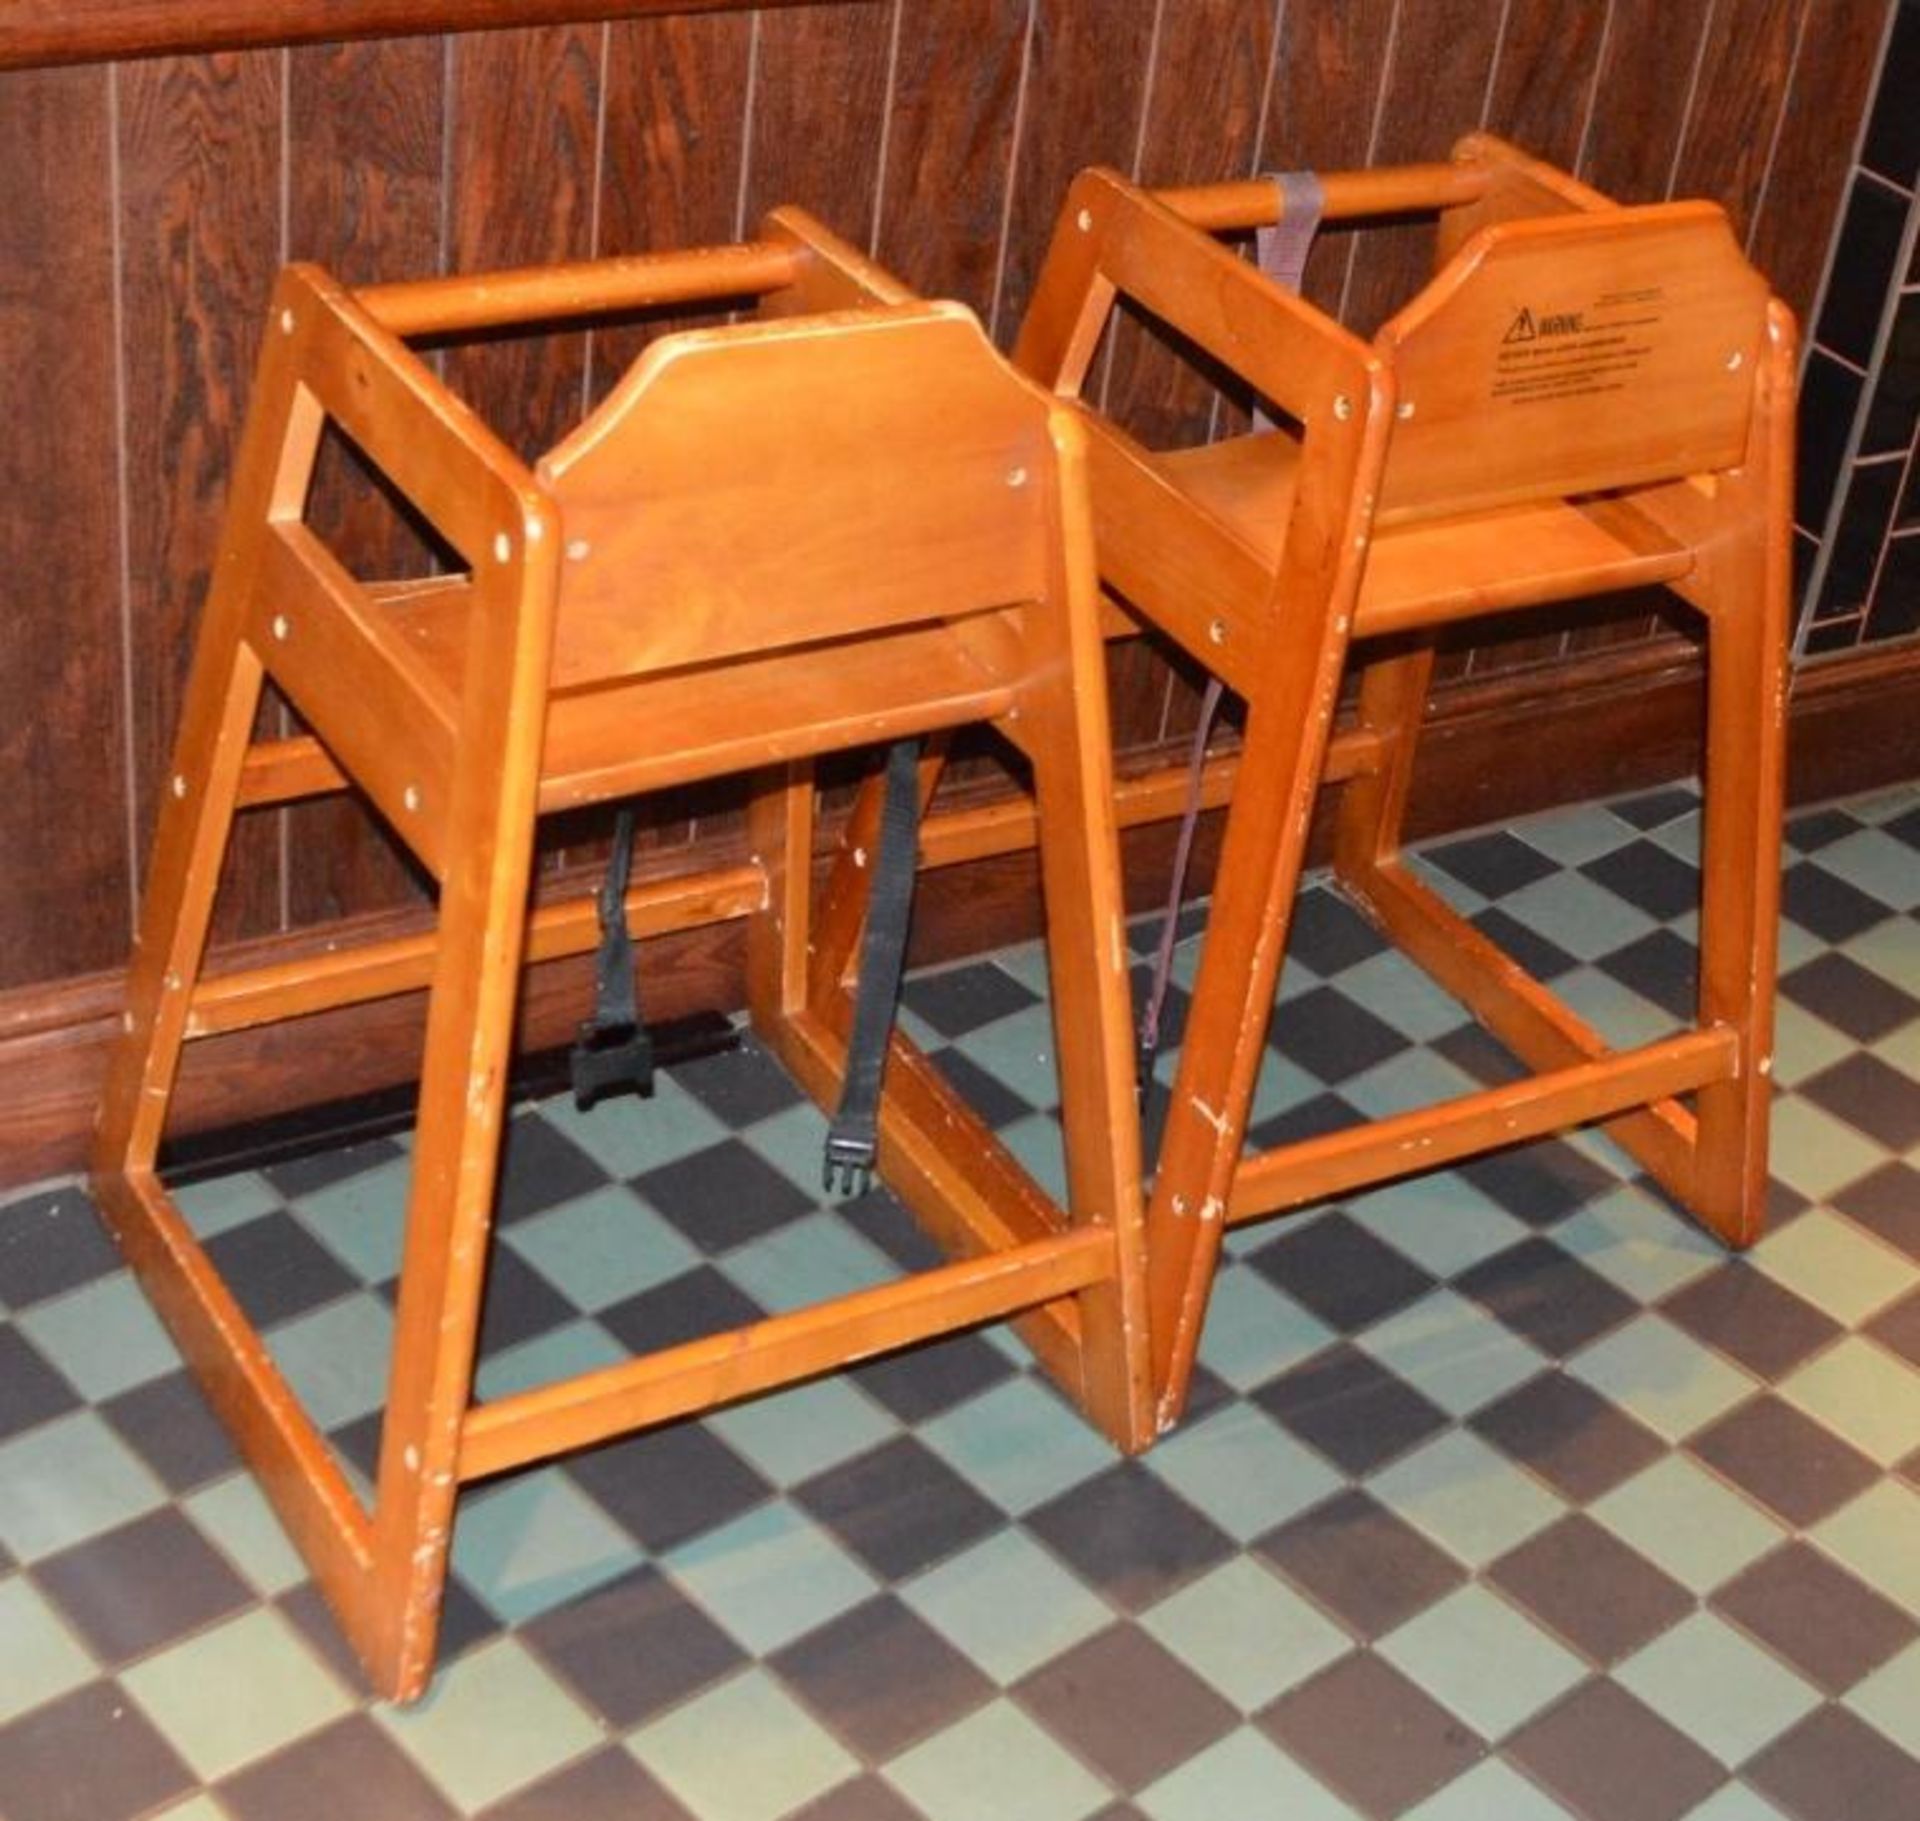 4 x Wooden Childrens High Chairs - CL390 - Location: Sheffield S9This lot will incur a site fee